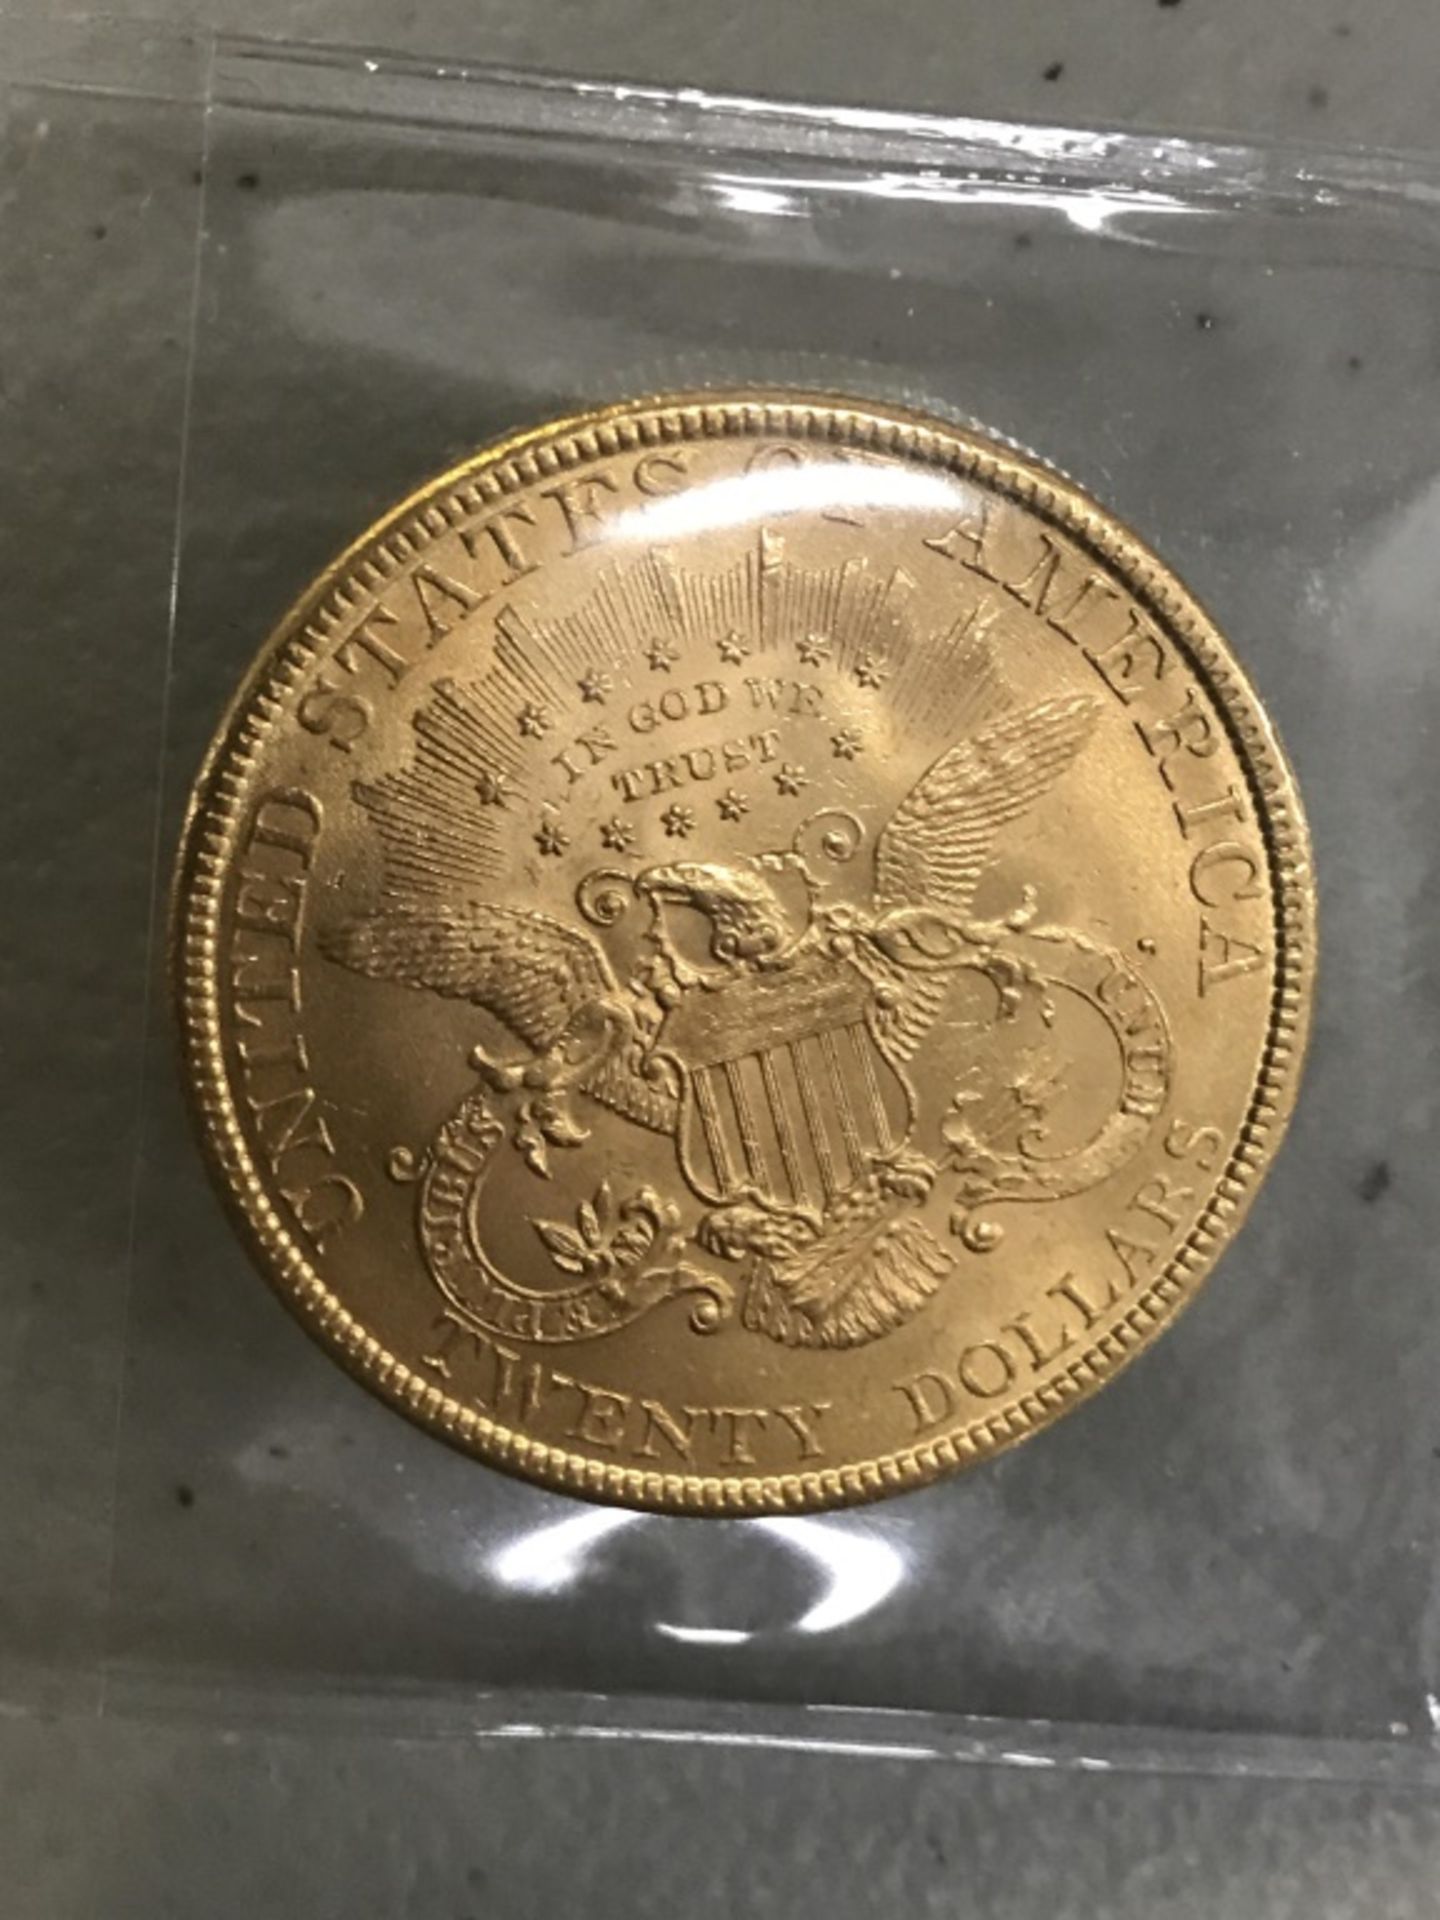 $20 US Gold 1895 Coin - Image 8 of 9